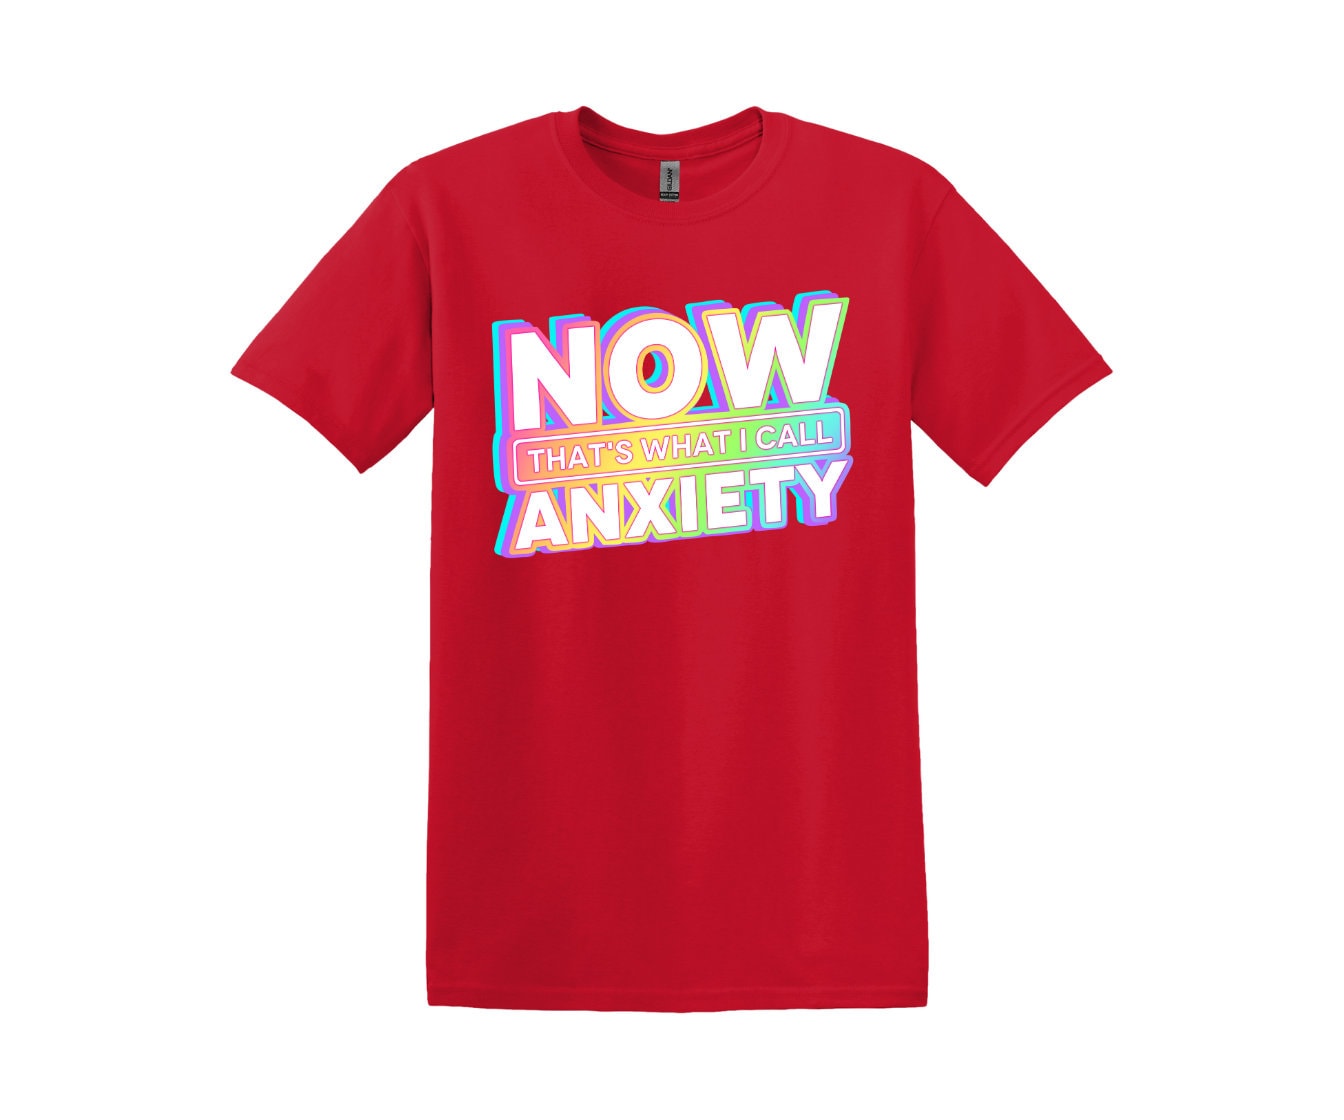 Now That's What I Call Anxiety, Funny Anxiety T-Shirt, Adult Tee